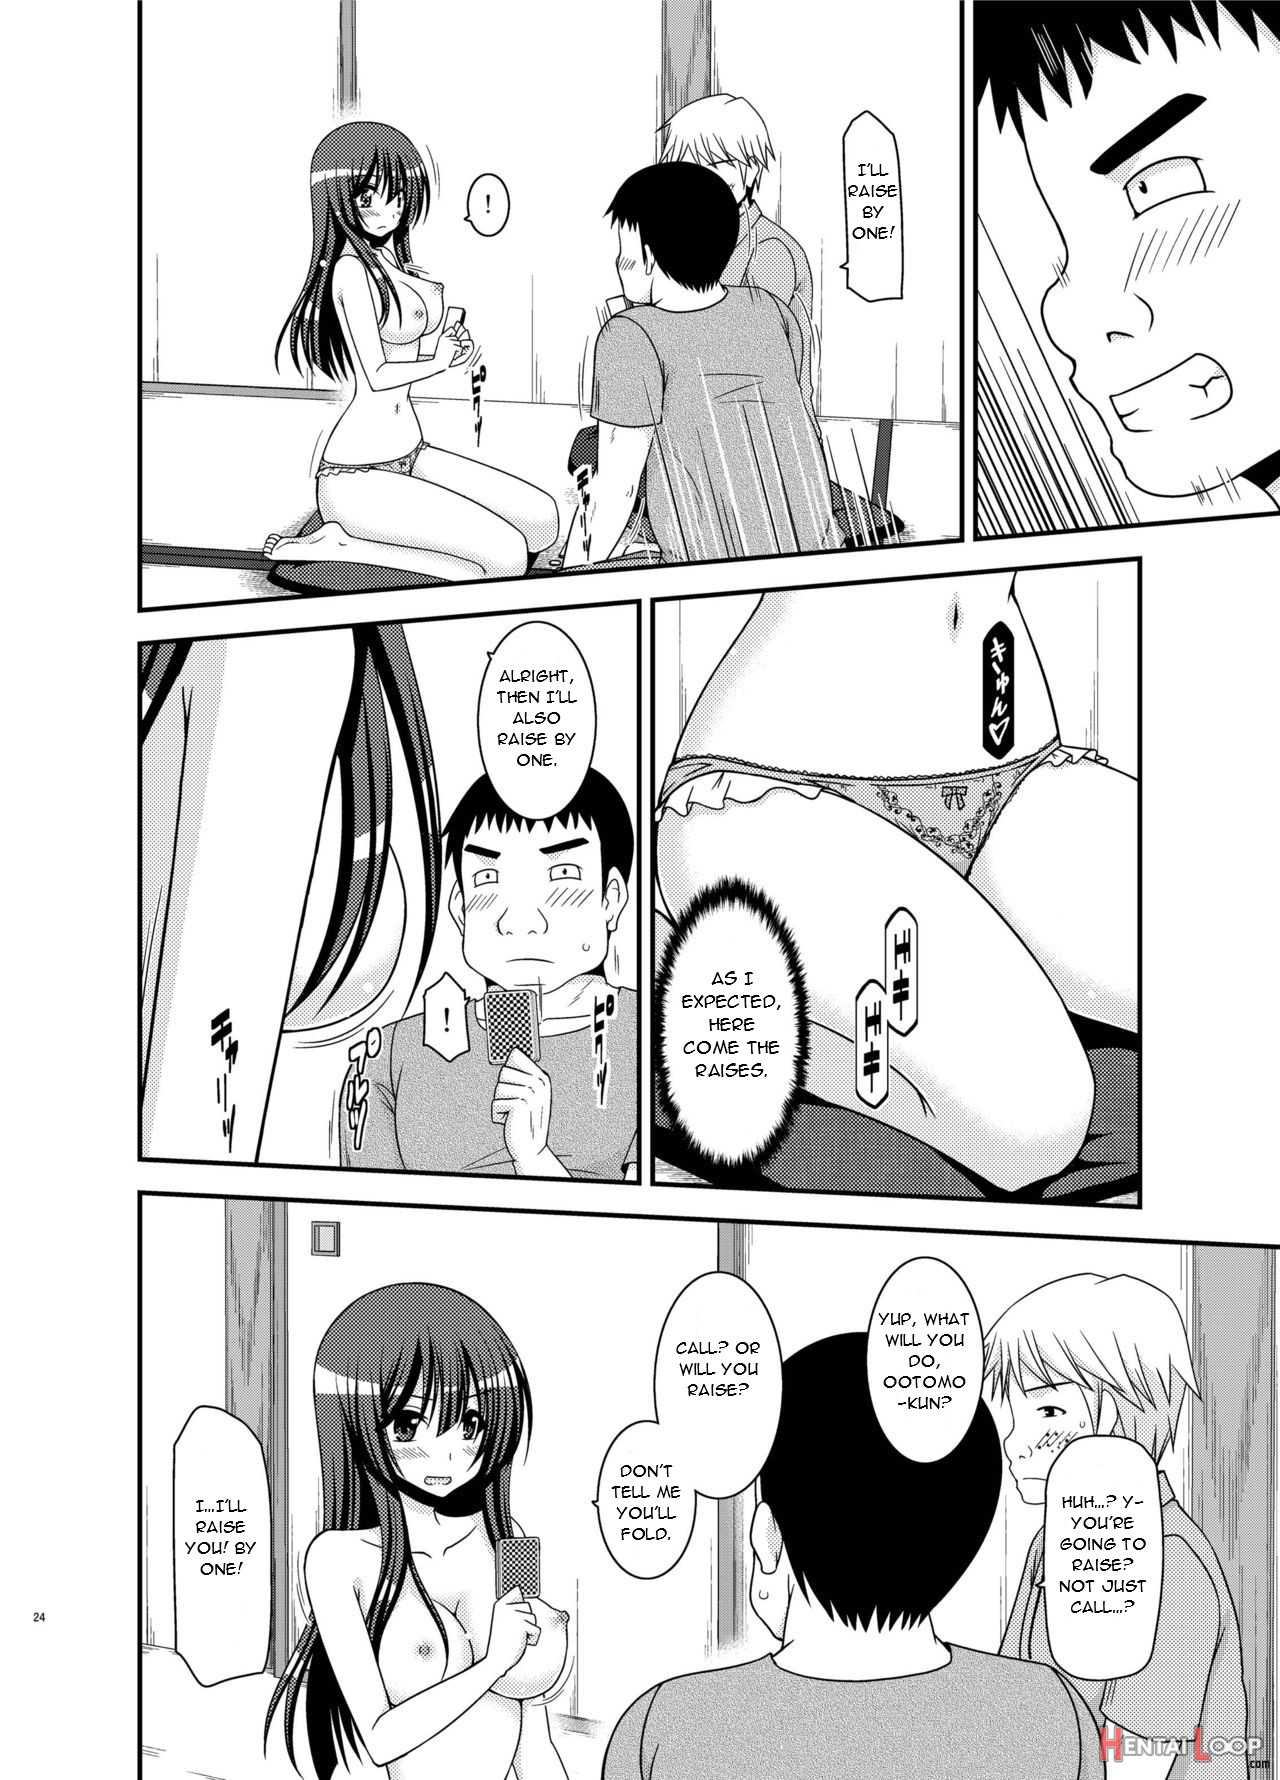 Exhibitionist Girl Diary Chapter 20 page 24